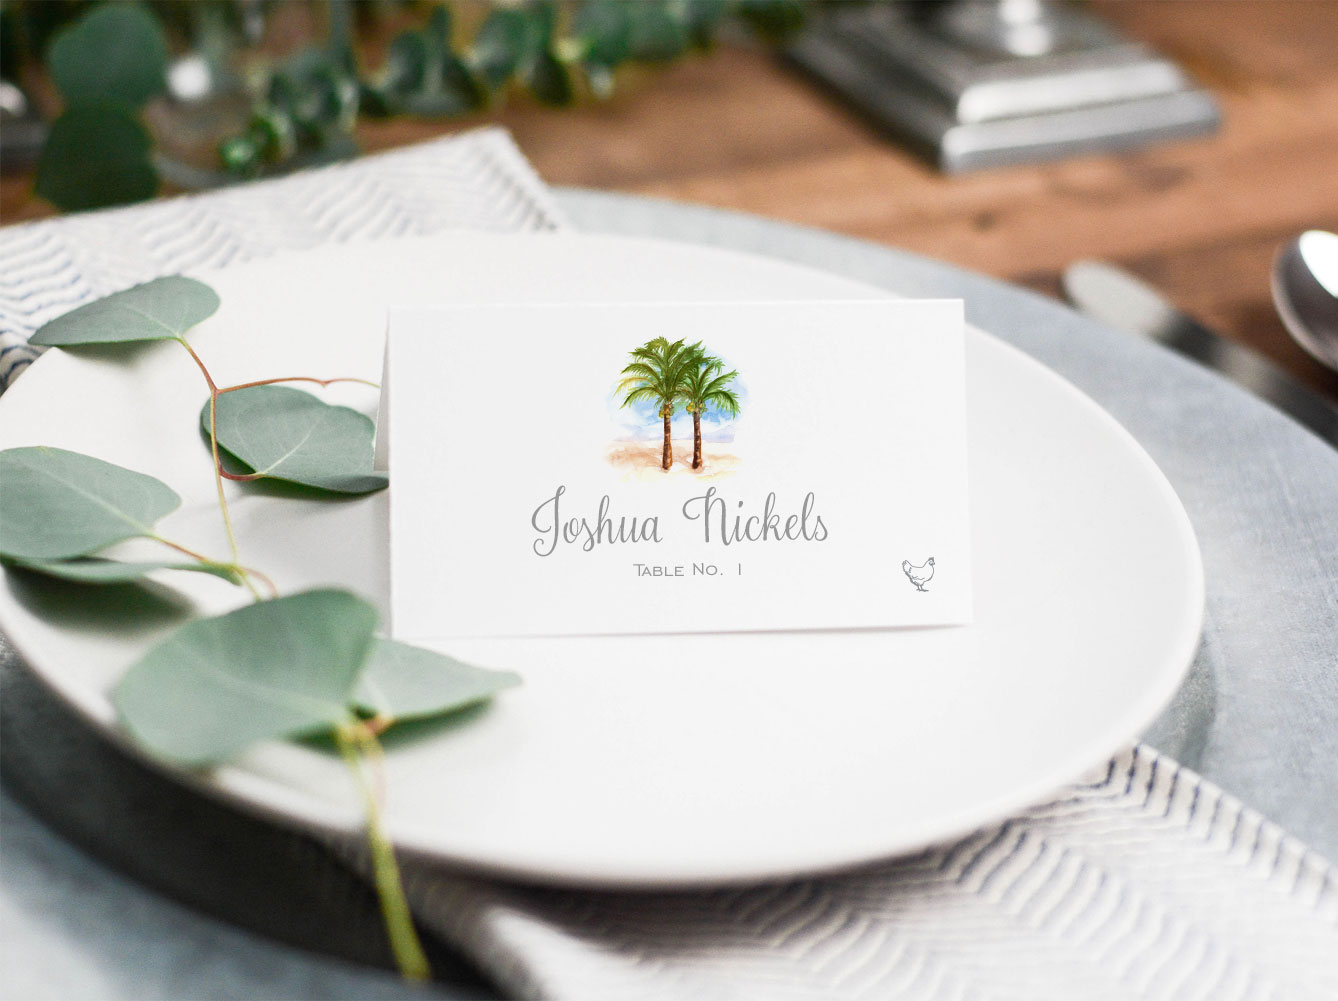 Wedding Place Cards Etiquette - Printed Personalized Place Cards with Food Choice - Mospens Studio